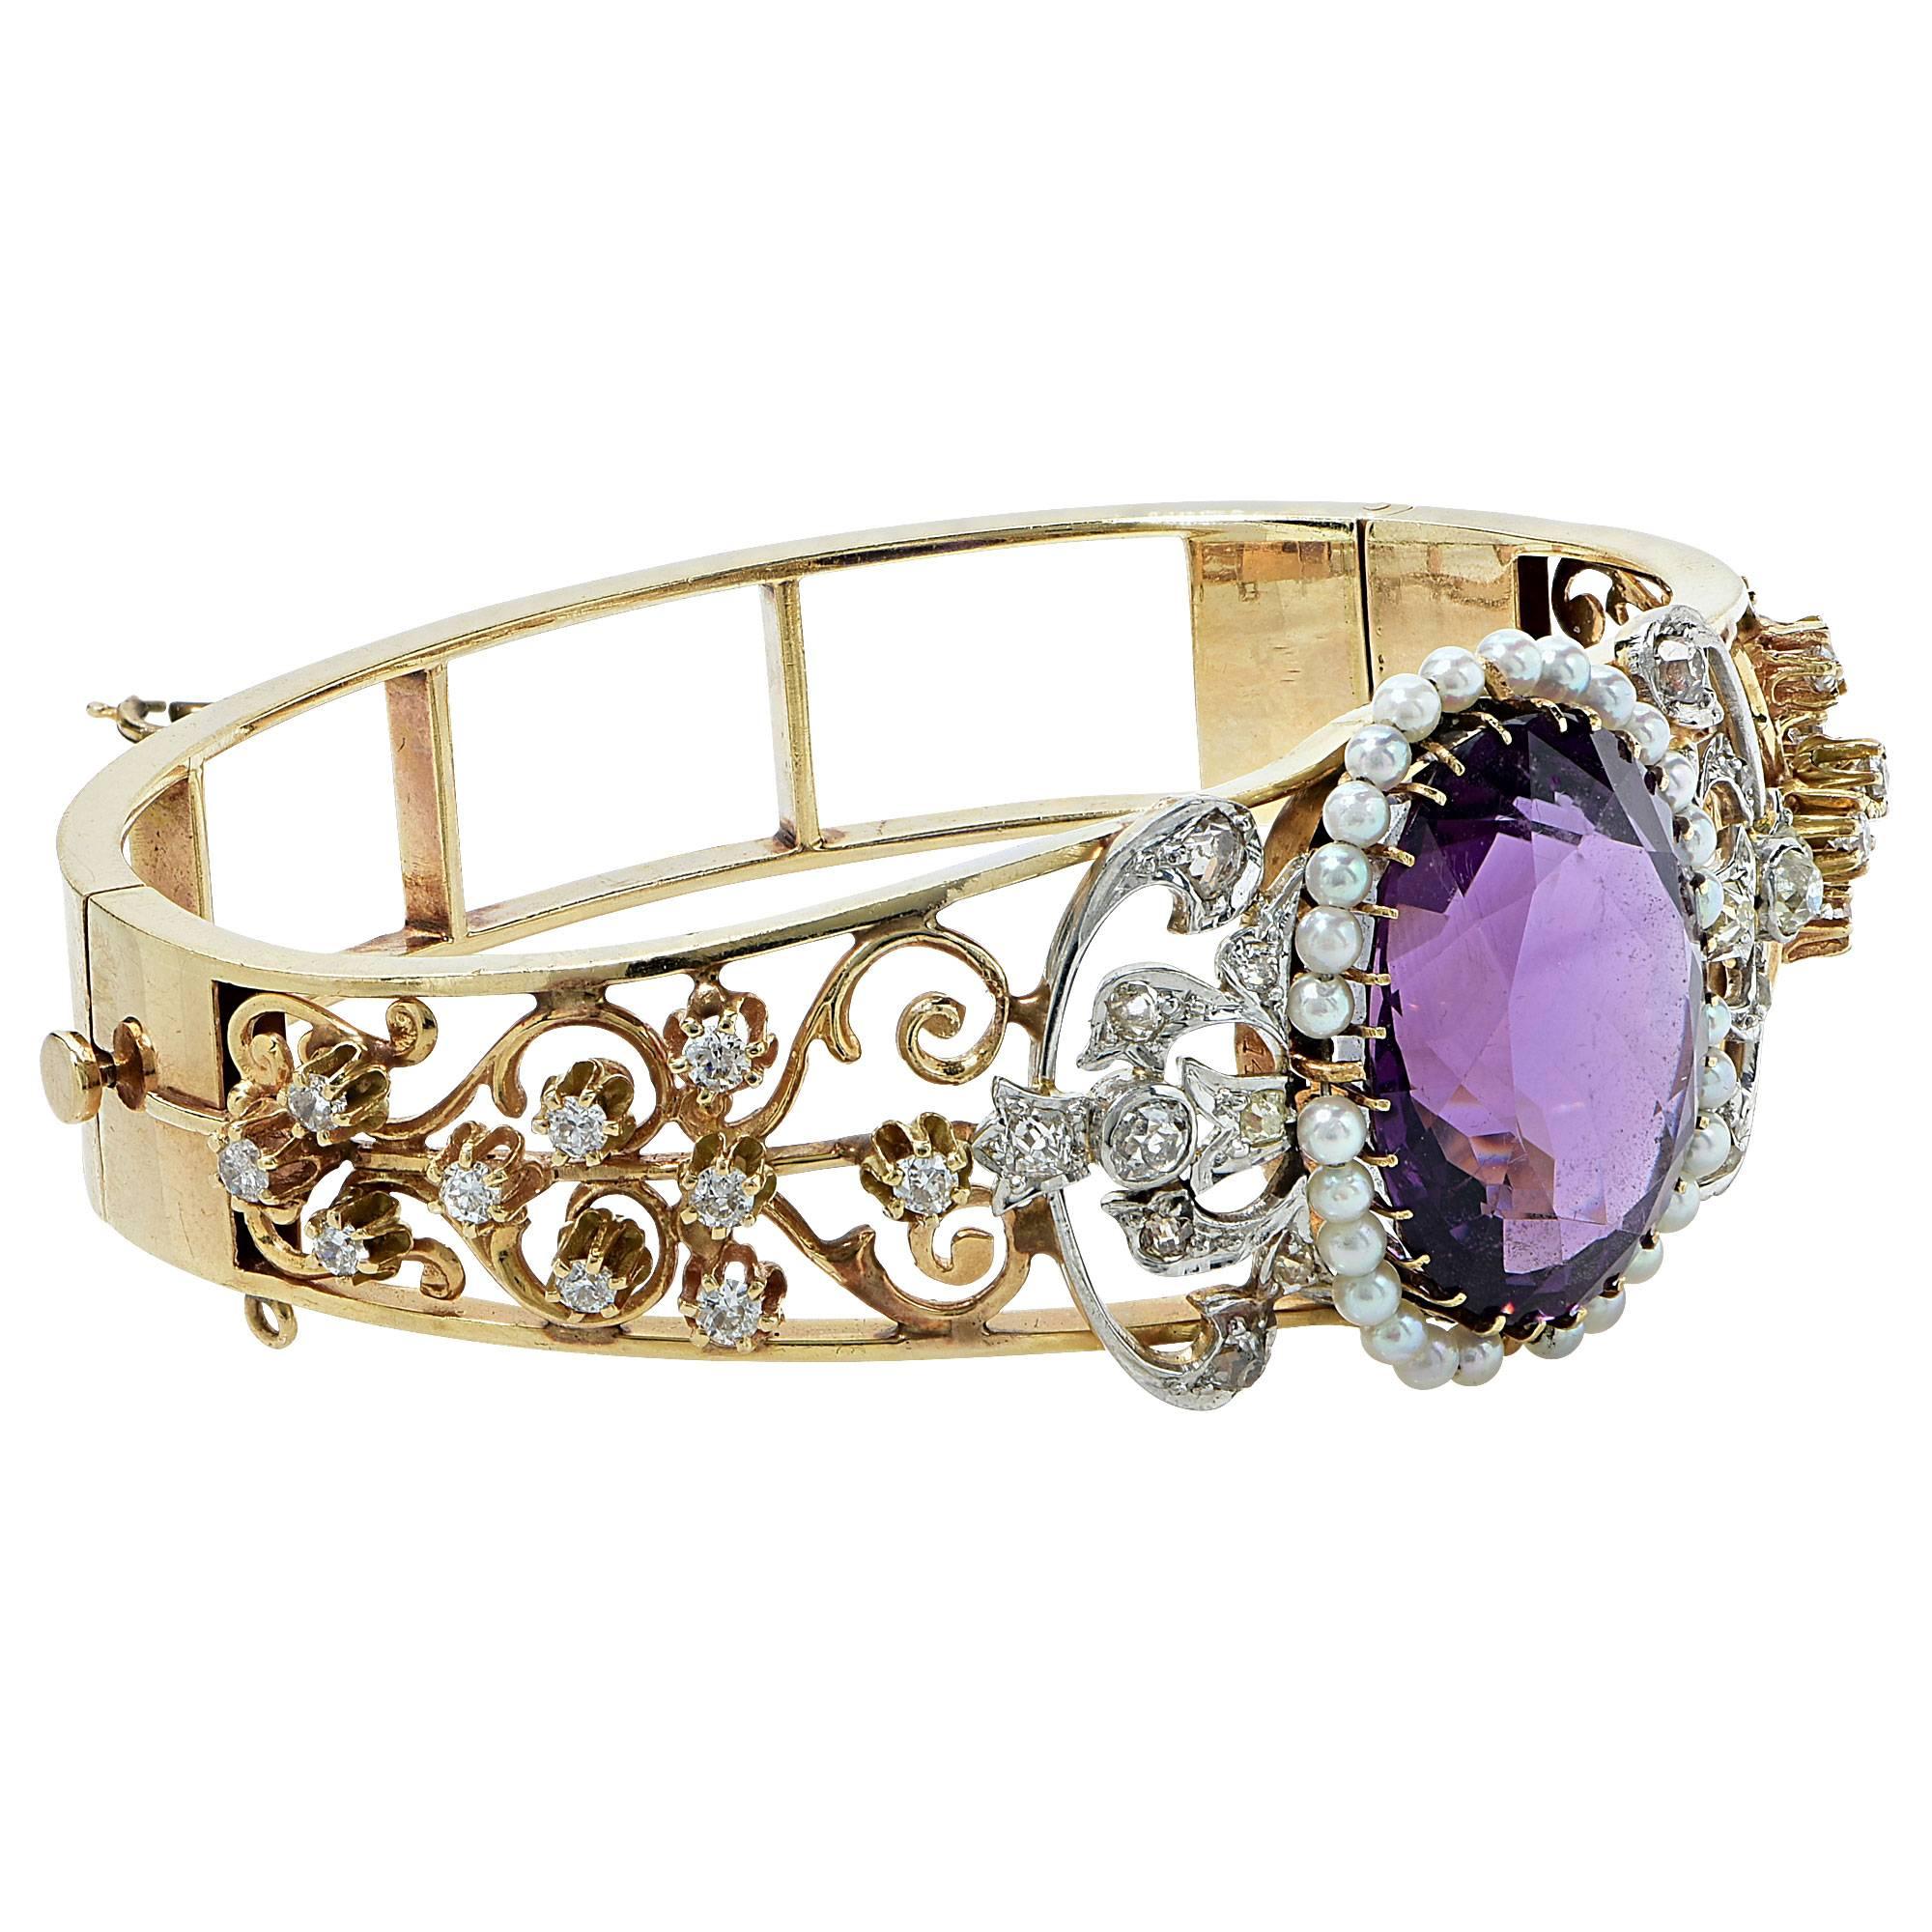 Yellow gold bangle from the Victorian era containing a 21ct amethyst surrounded by pearls, assumed to be natural and accented by 40 mixed cut diamonds weighing approximately 1.20cts.

Metal weight: 33.97 grams

This bracelet is accompanied by a